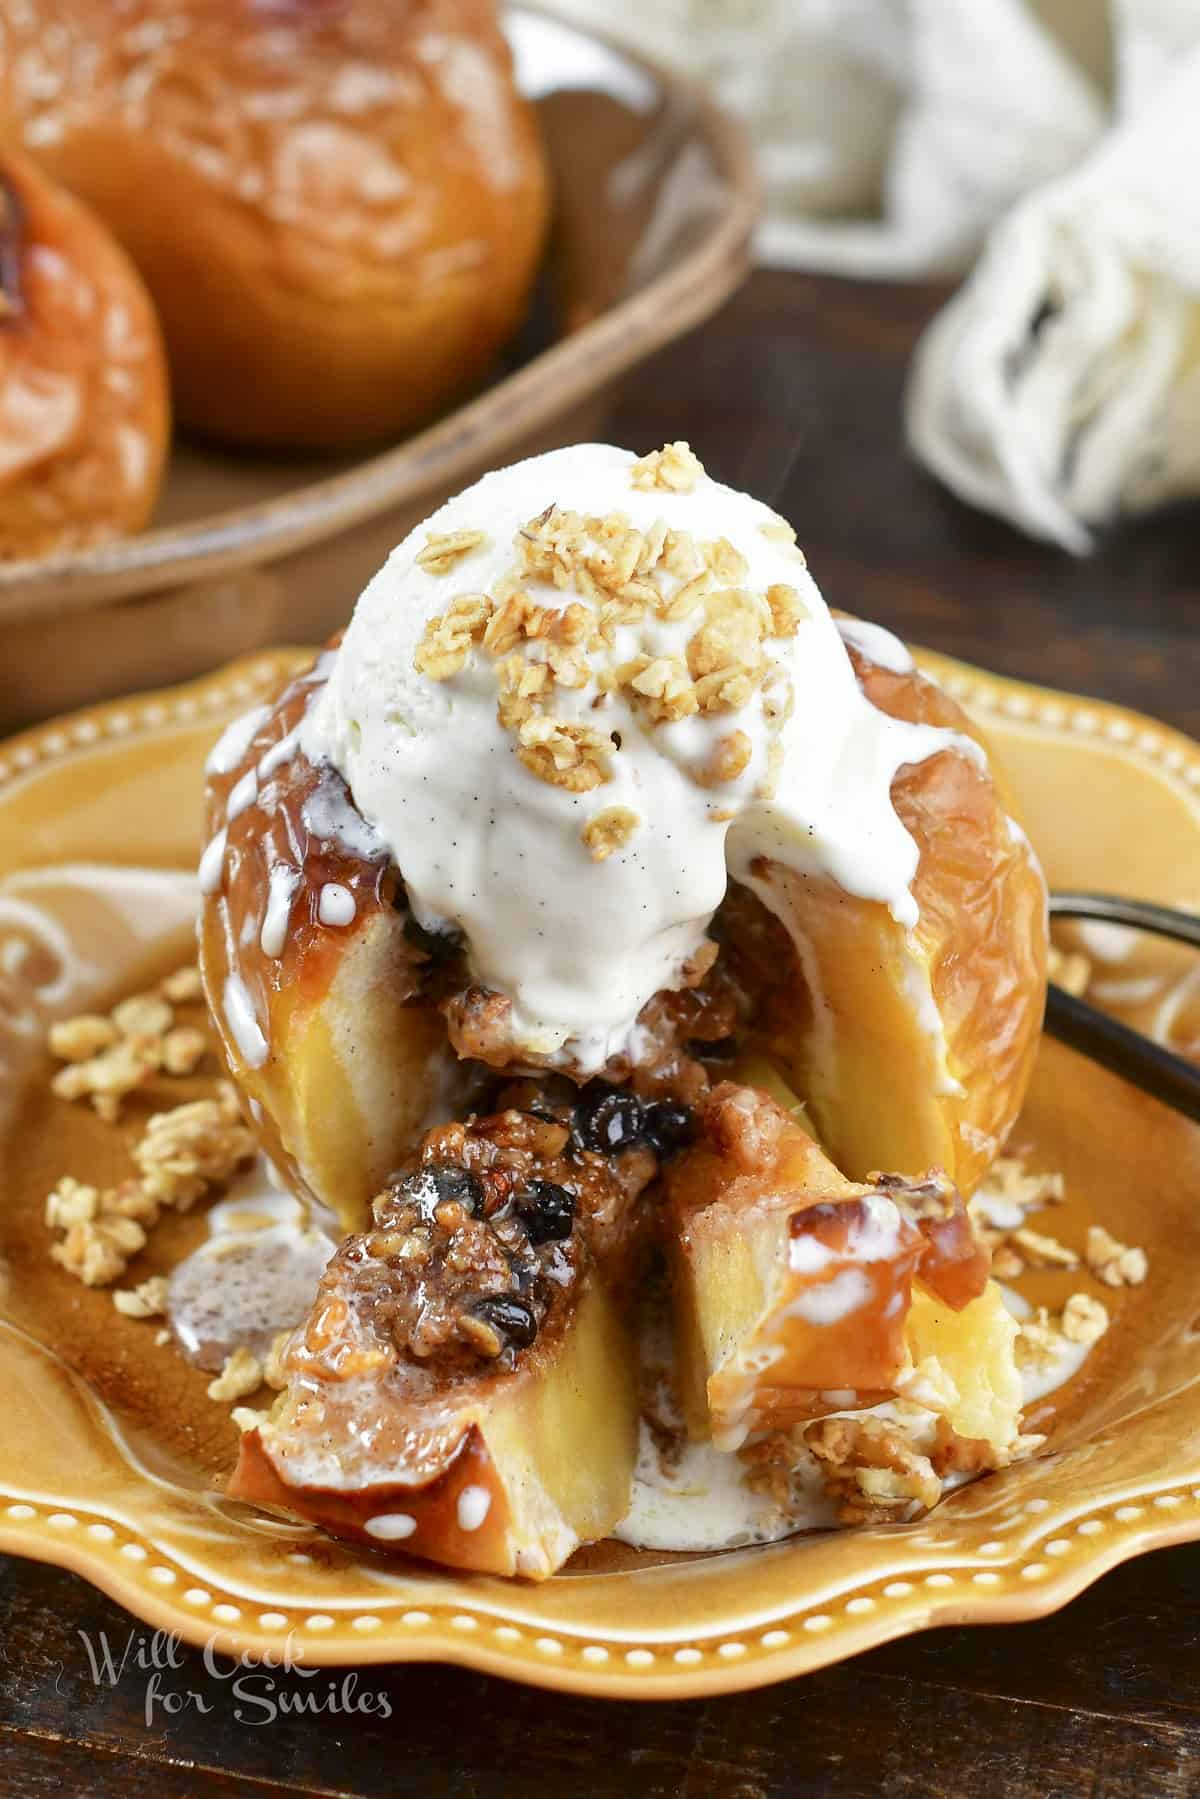 baked apple with ice cream with cut slices